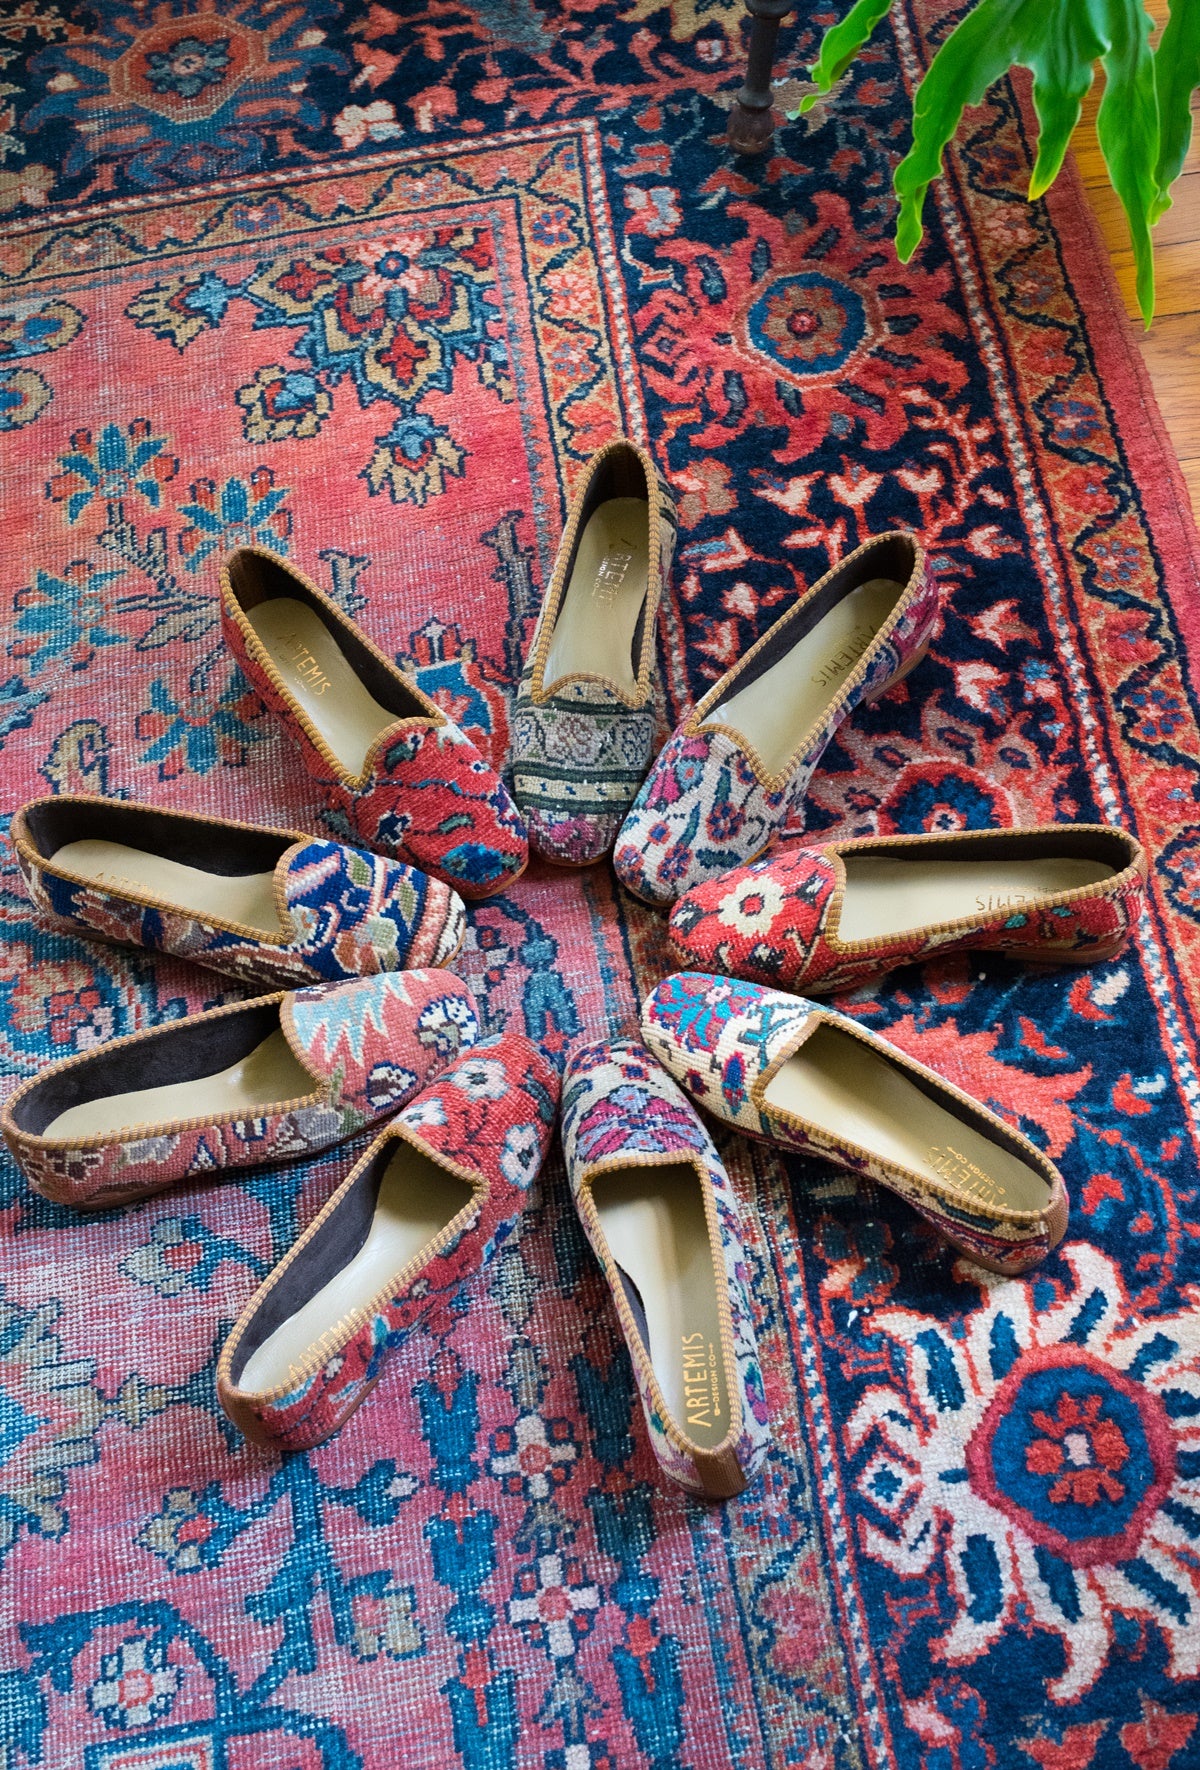 circle of women's carpet loafers on an oriental carpet